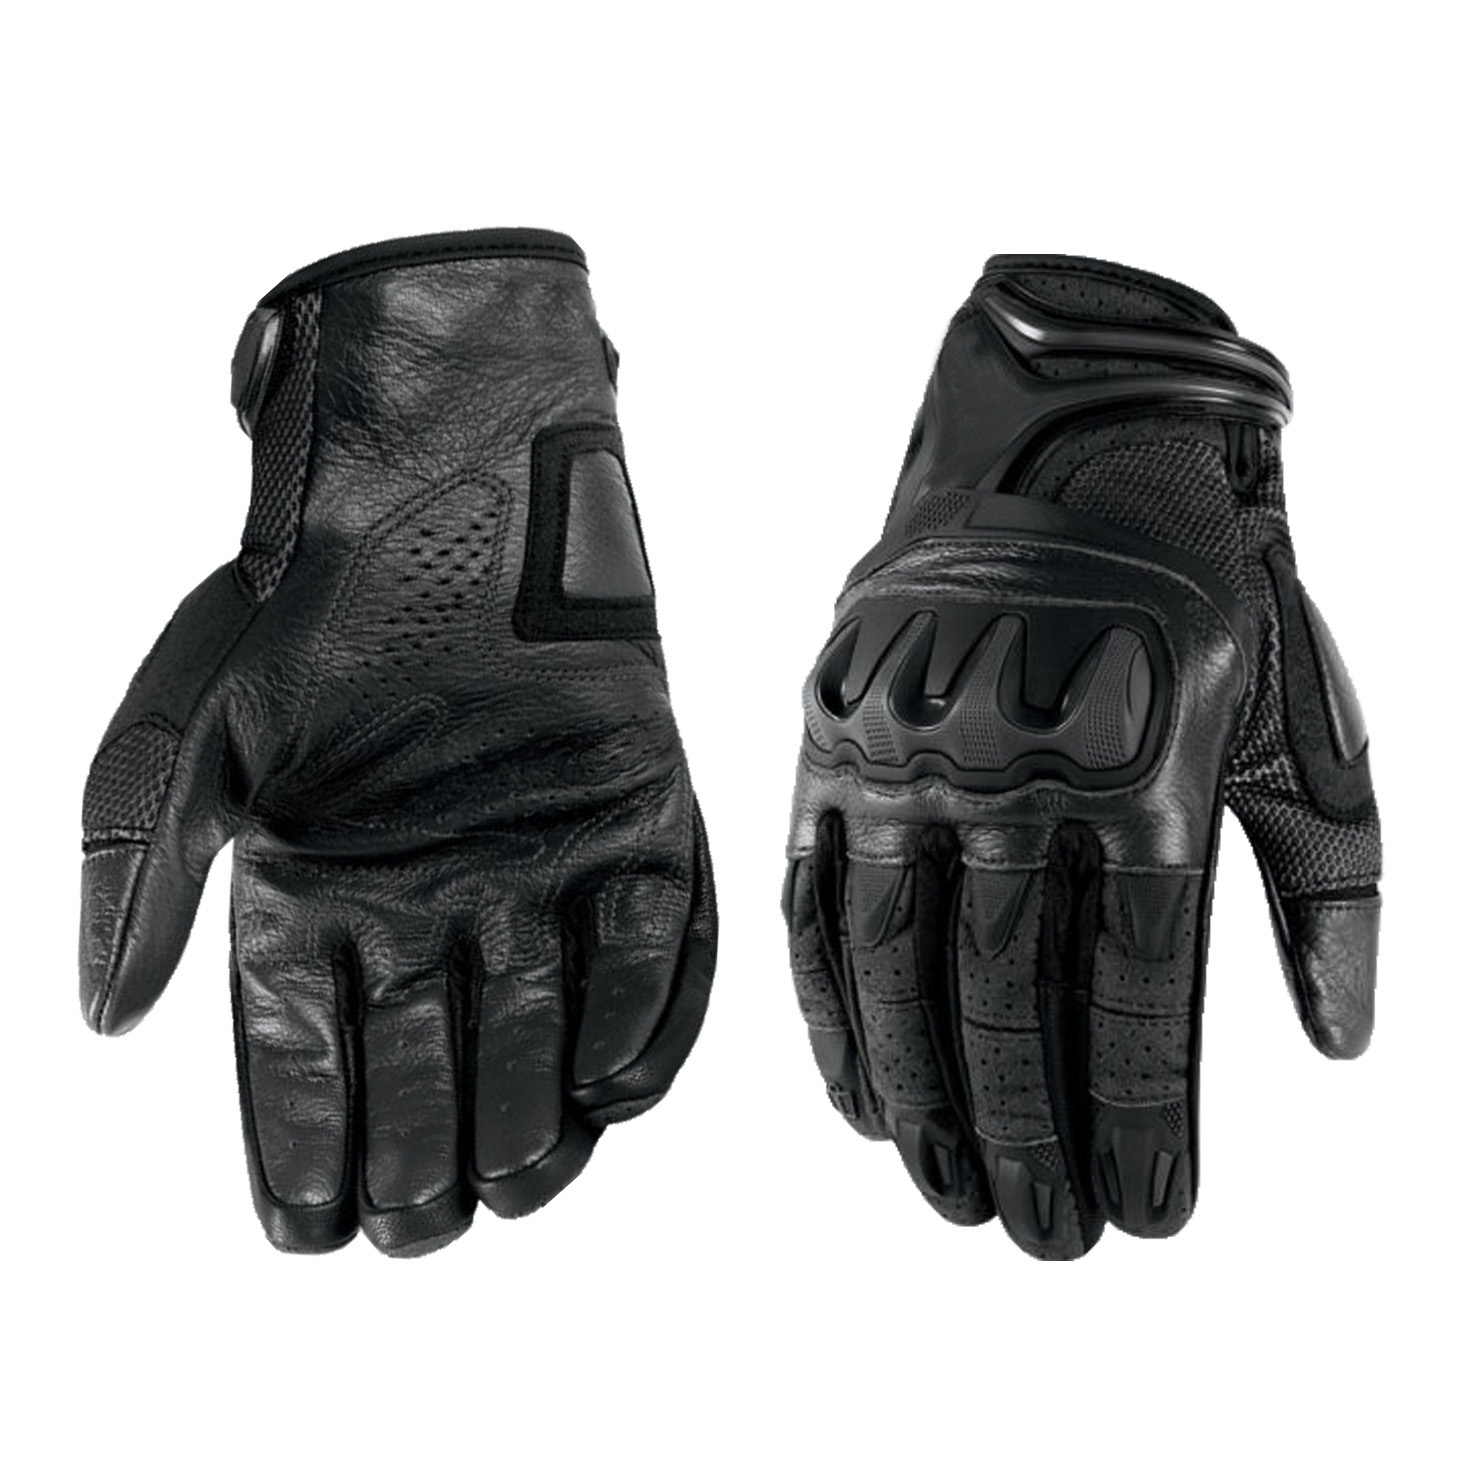 Cowhide leather motorcycle gloves motorcycling with knuckle protection